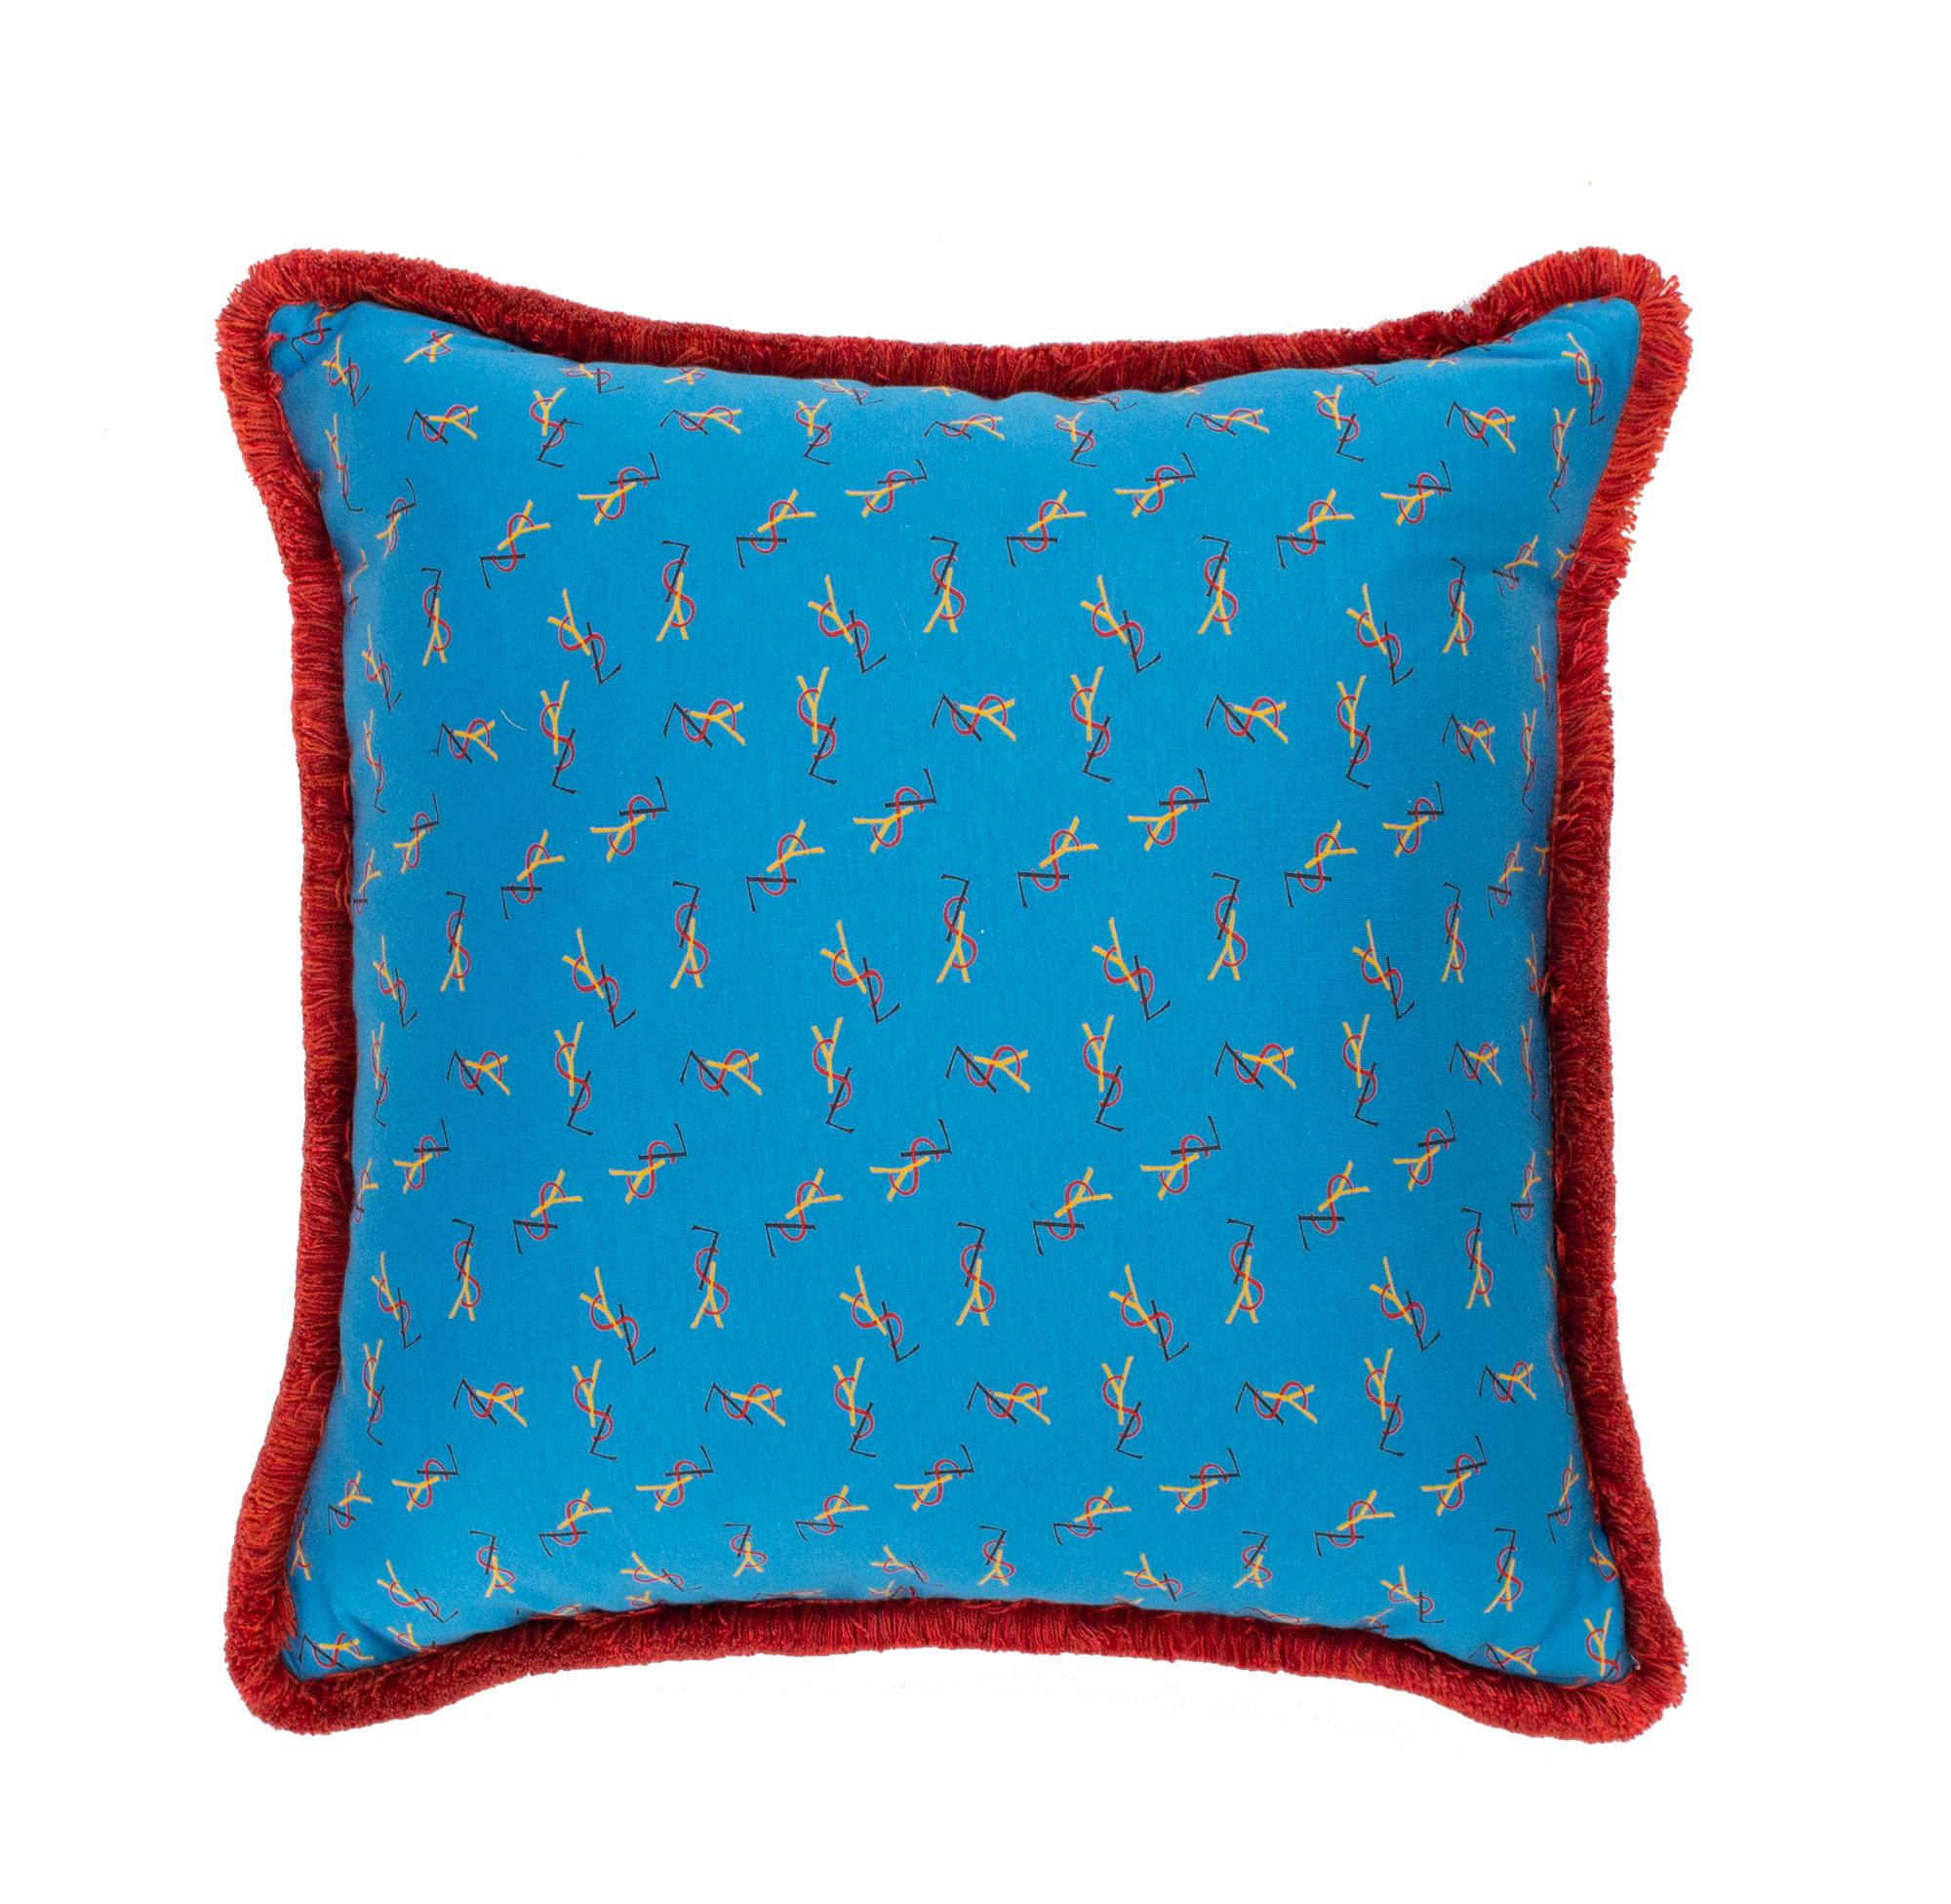 Hand-crafted pillows with front made of beautiful vintage Yves Saint Laurent jersey fabric. It features yellow, red and darkblue logos against a light blue background. Backside in velvet. Fringes in red terracotta cotton. An eclectic style suitable